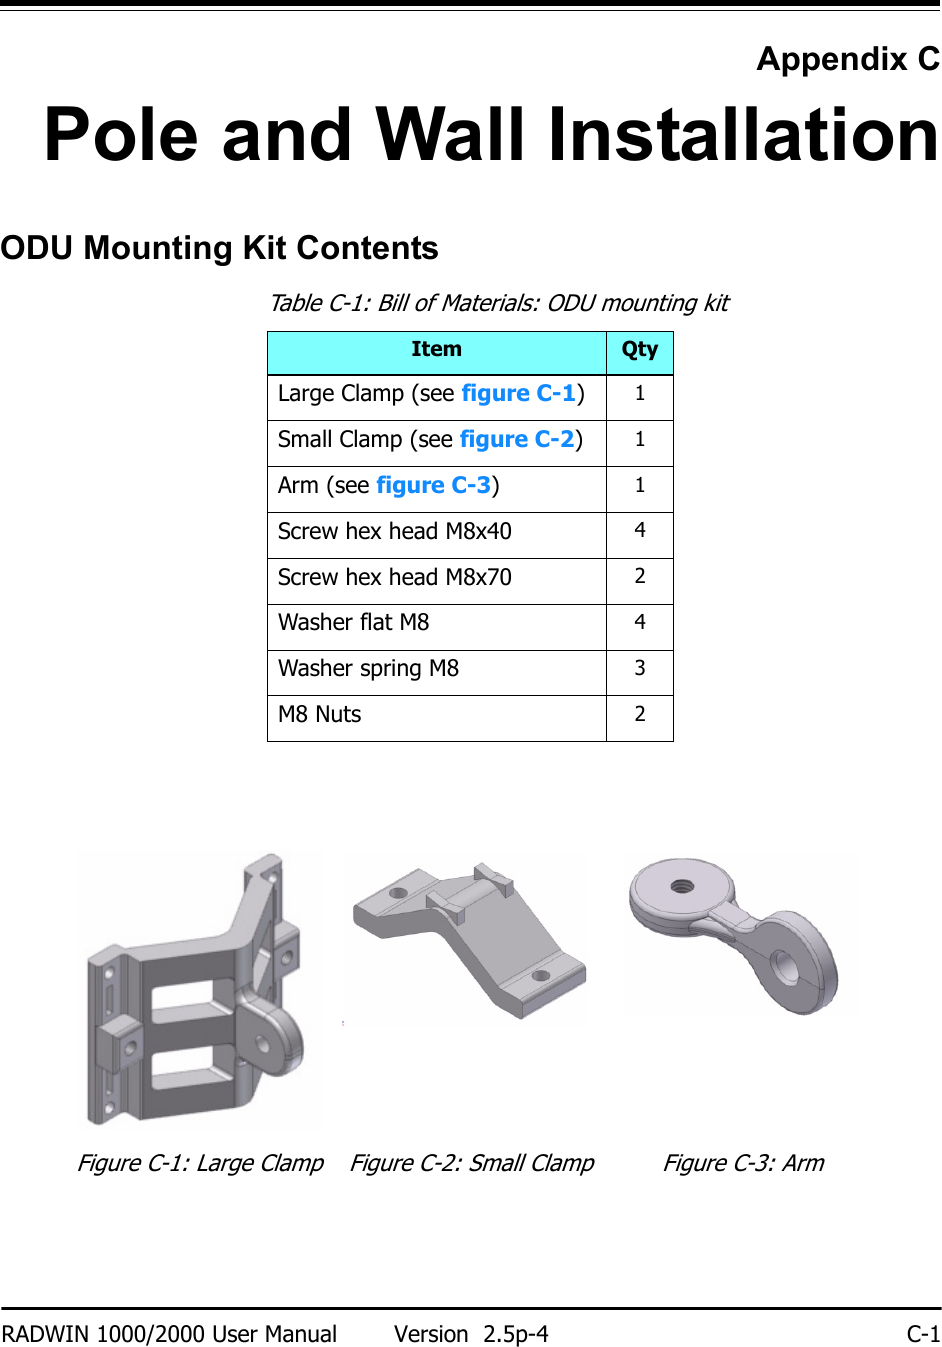 RADWIN 1000/2000 User Manual Version  2.5p-4 C-1Appendix CPole and Wall InstallationODU Mounting Kit ContentsTable C-1: Bill of Materials: ODU mounting kitItem QtyLarge Clamp (see figure C-1)1Small Clamp (see figure C-2)1Arm (see figure C-3)1Screw hex head M8x40 4Screw hex head M8x70 2Washer flat M8 4Washer spring M8 3M8 Nuts 2Figure C-1: Large Clamp Figure C-2: Small Clamp Figure C-3: Arm